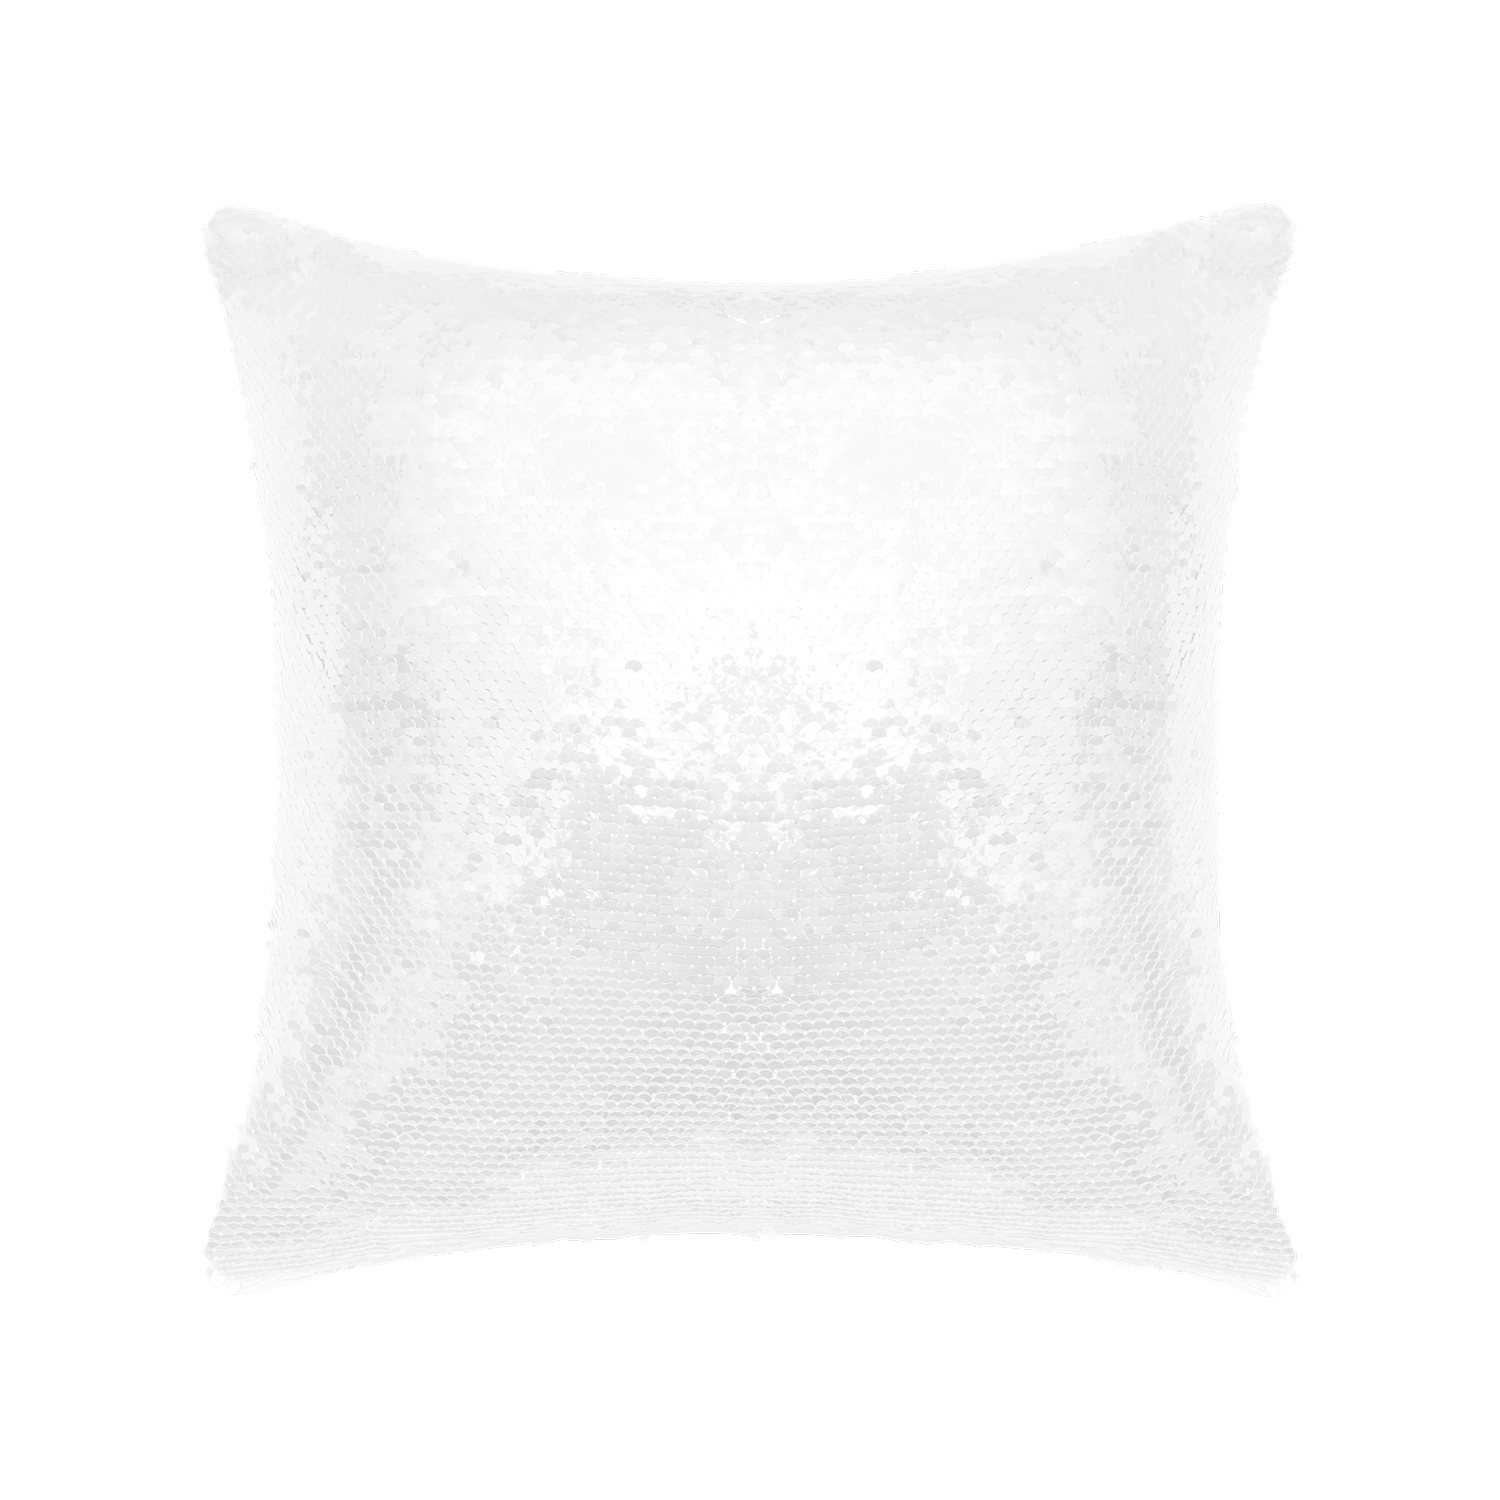 Golden Sequin Cushion Cover Without Filler | HugePOD-2